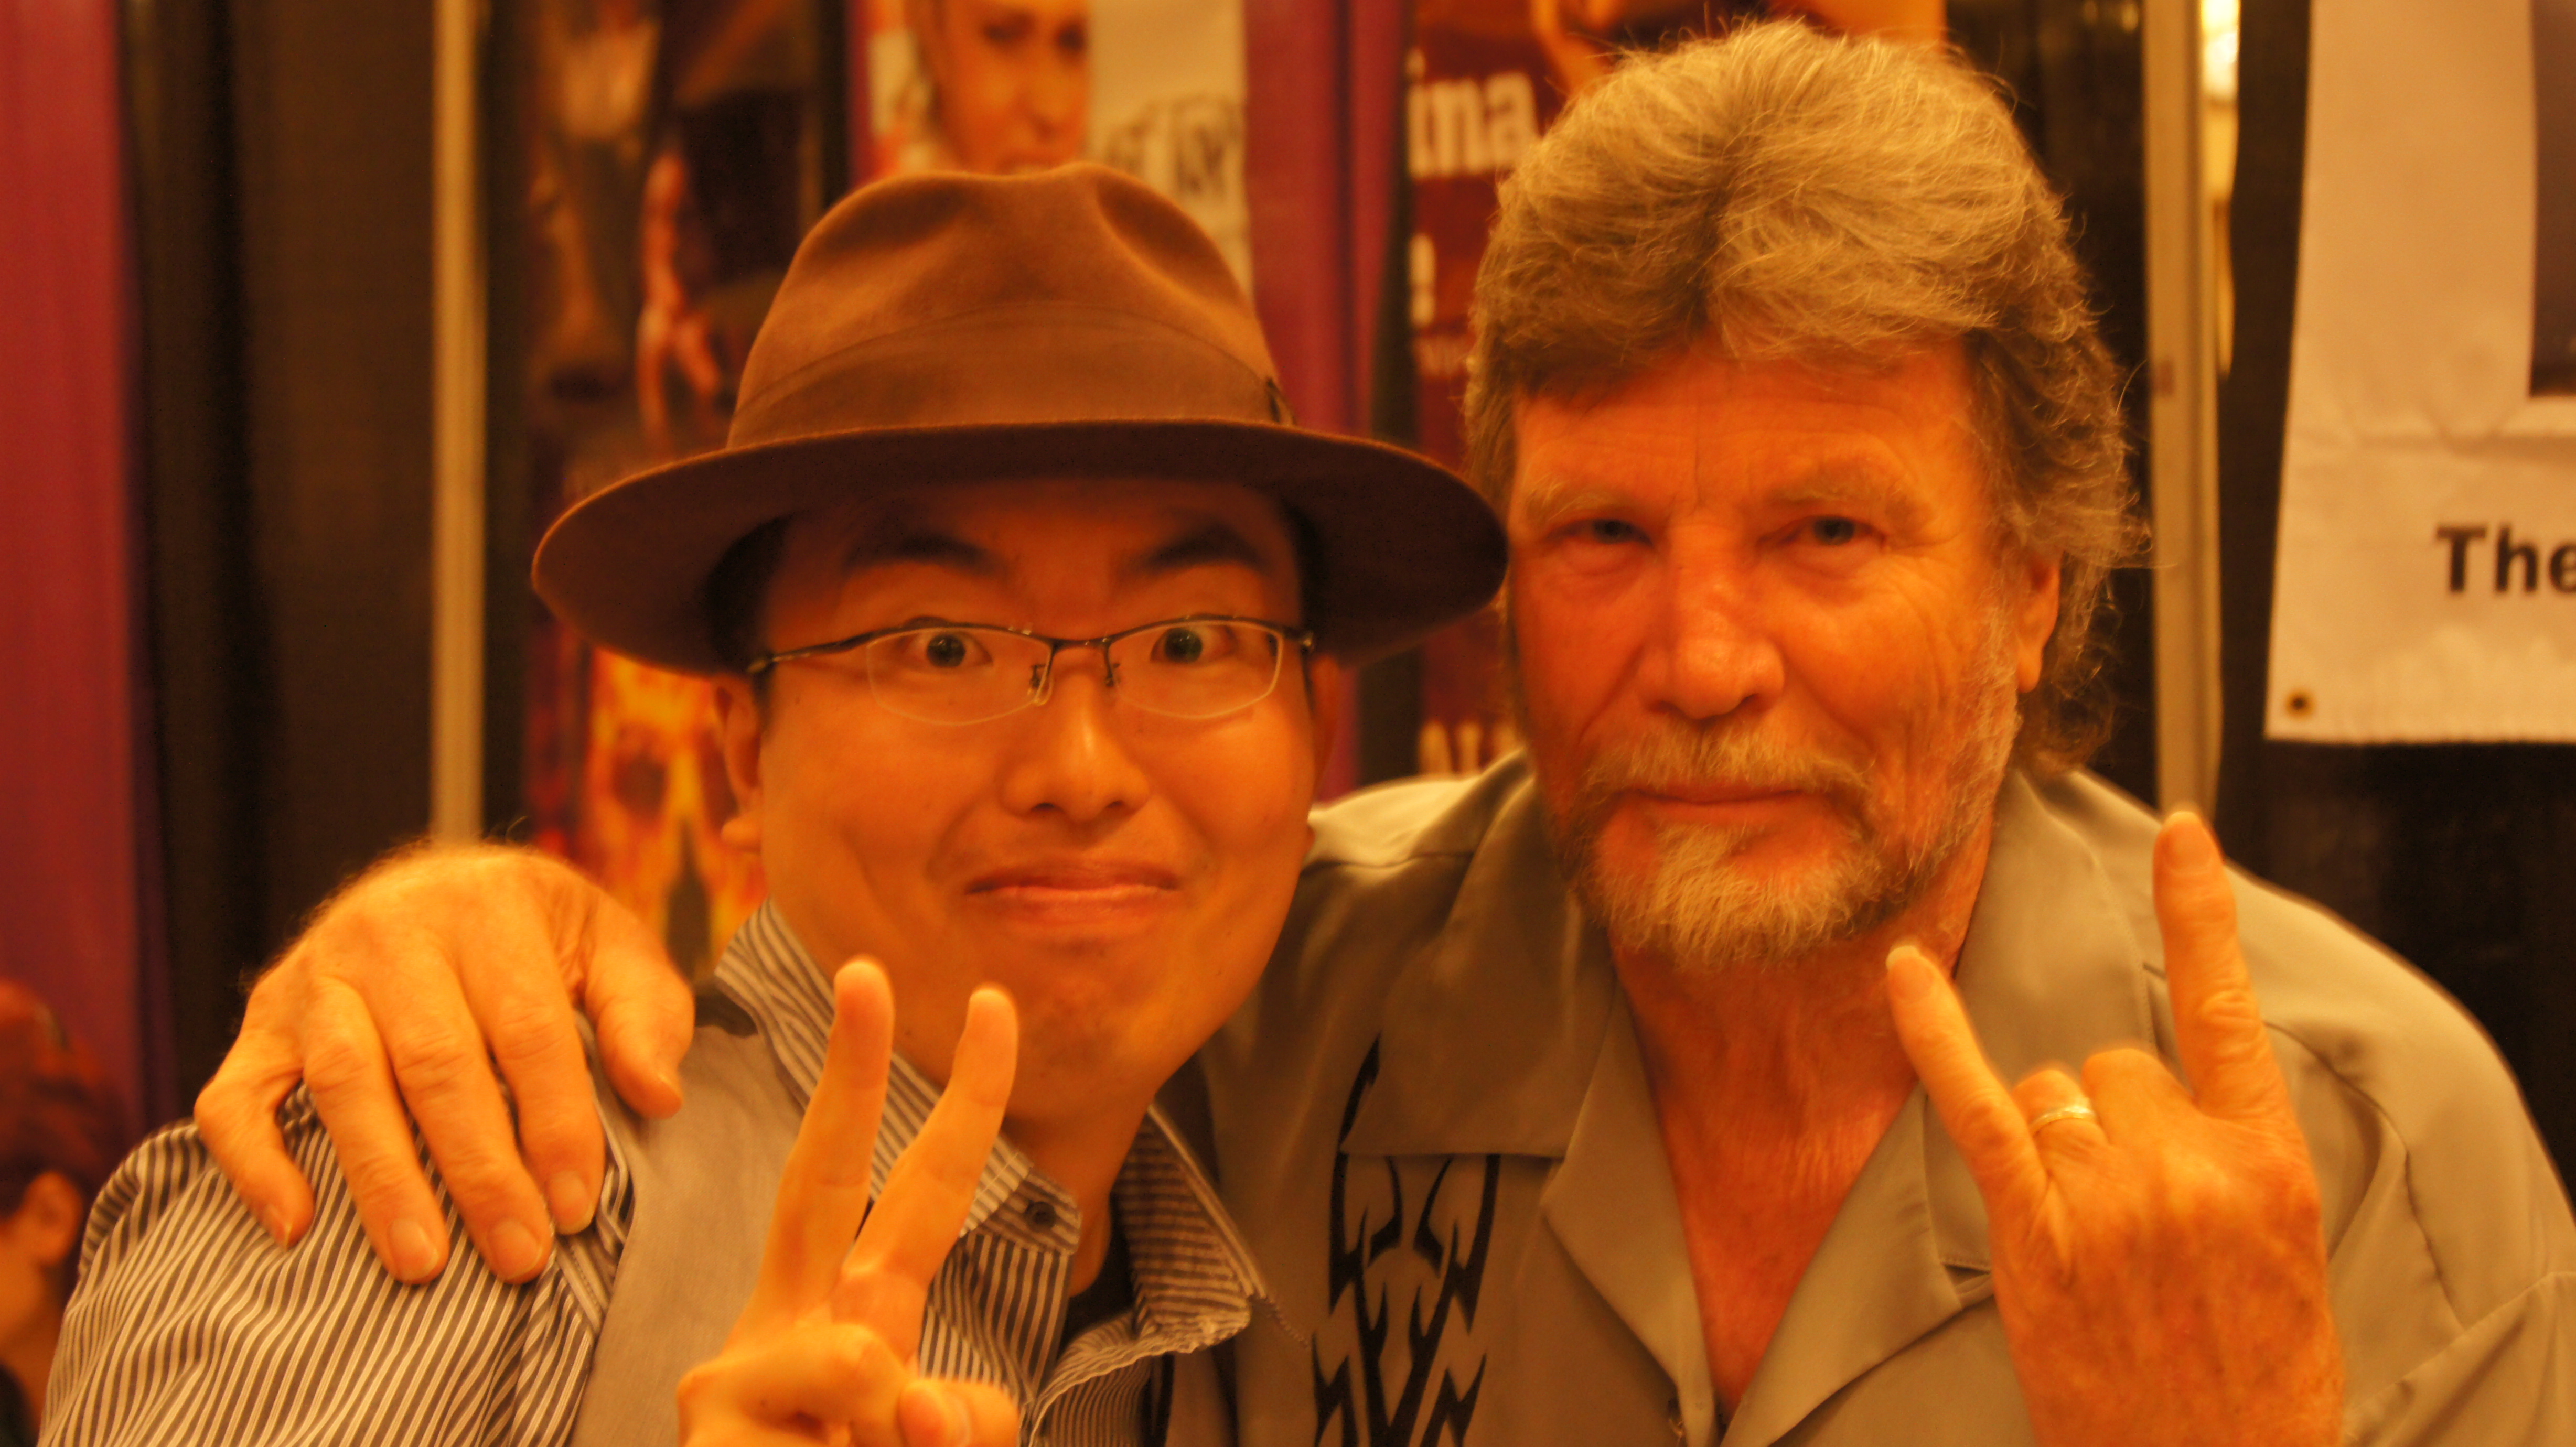 Vernon Wells who is mostly known for the legendary antagonist, Bennett in Commando (1985). And the Fright Night Film Festival 2012 Best Foreign Short Film Award (Corman Award) Winner Ryota Nakanishi.